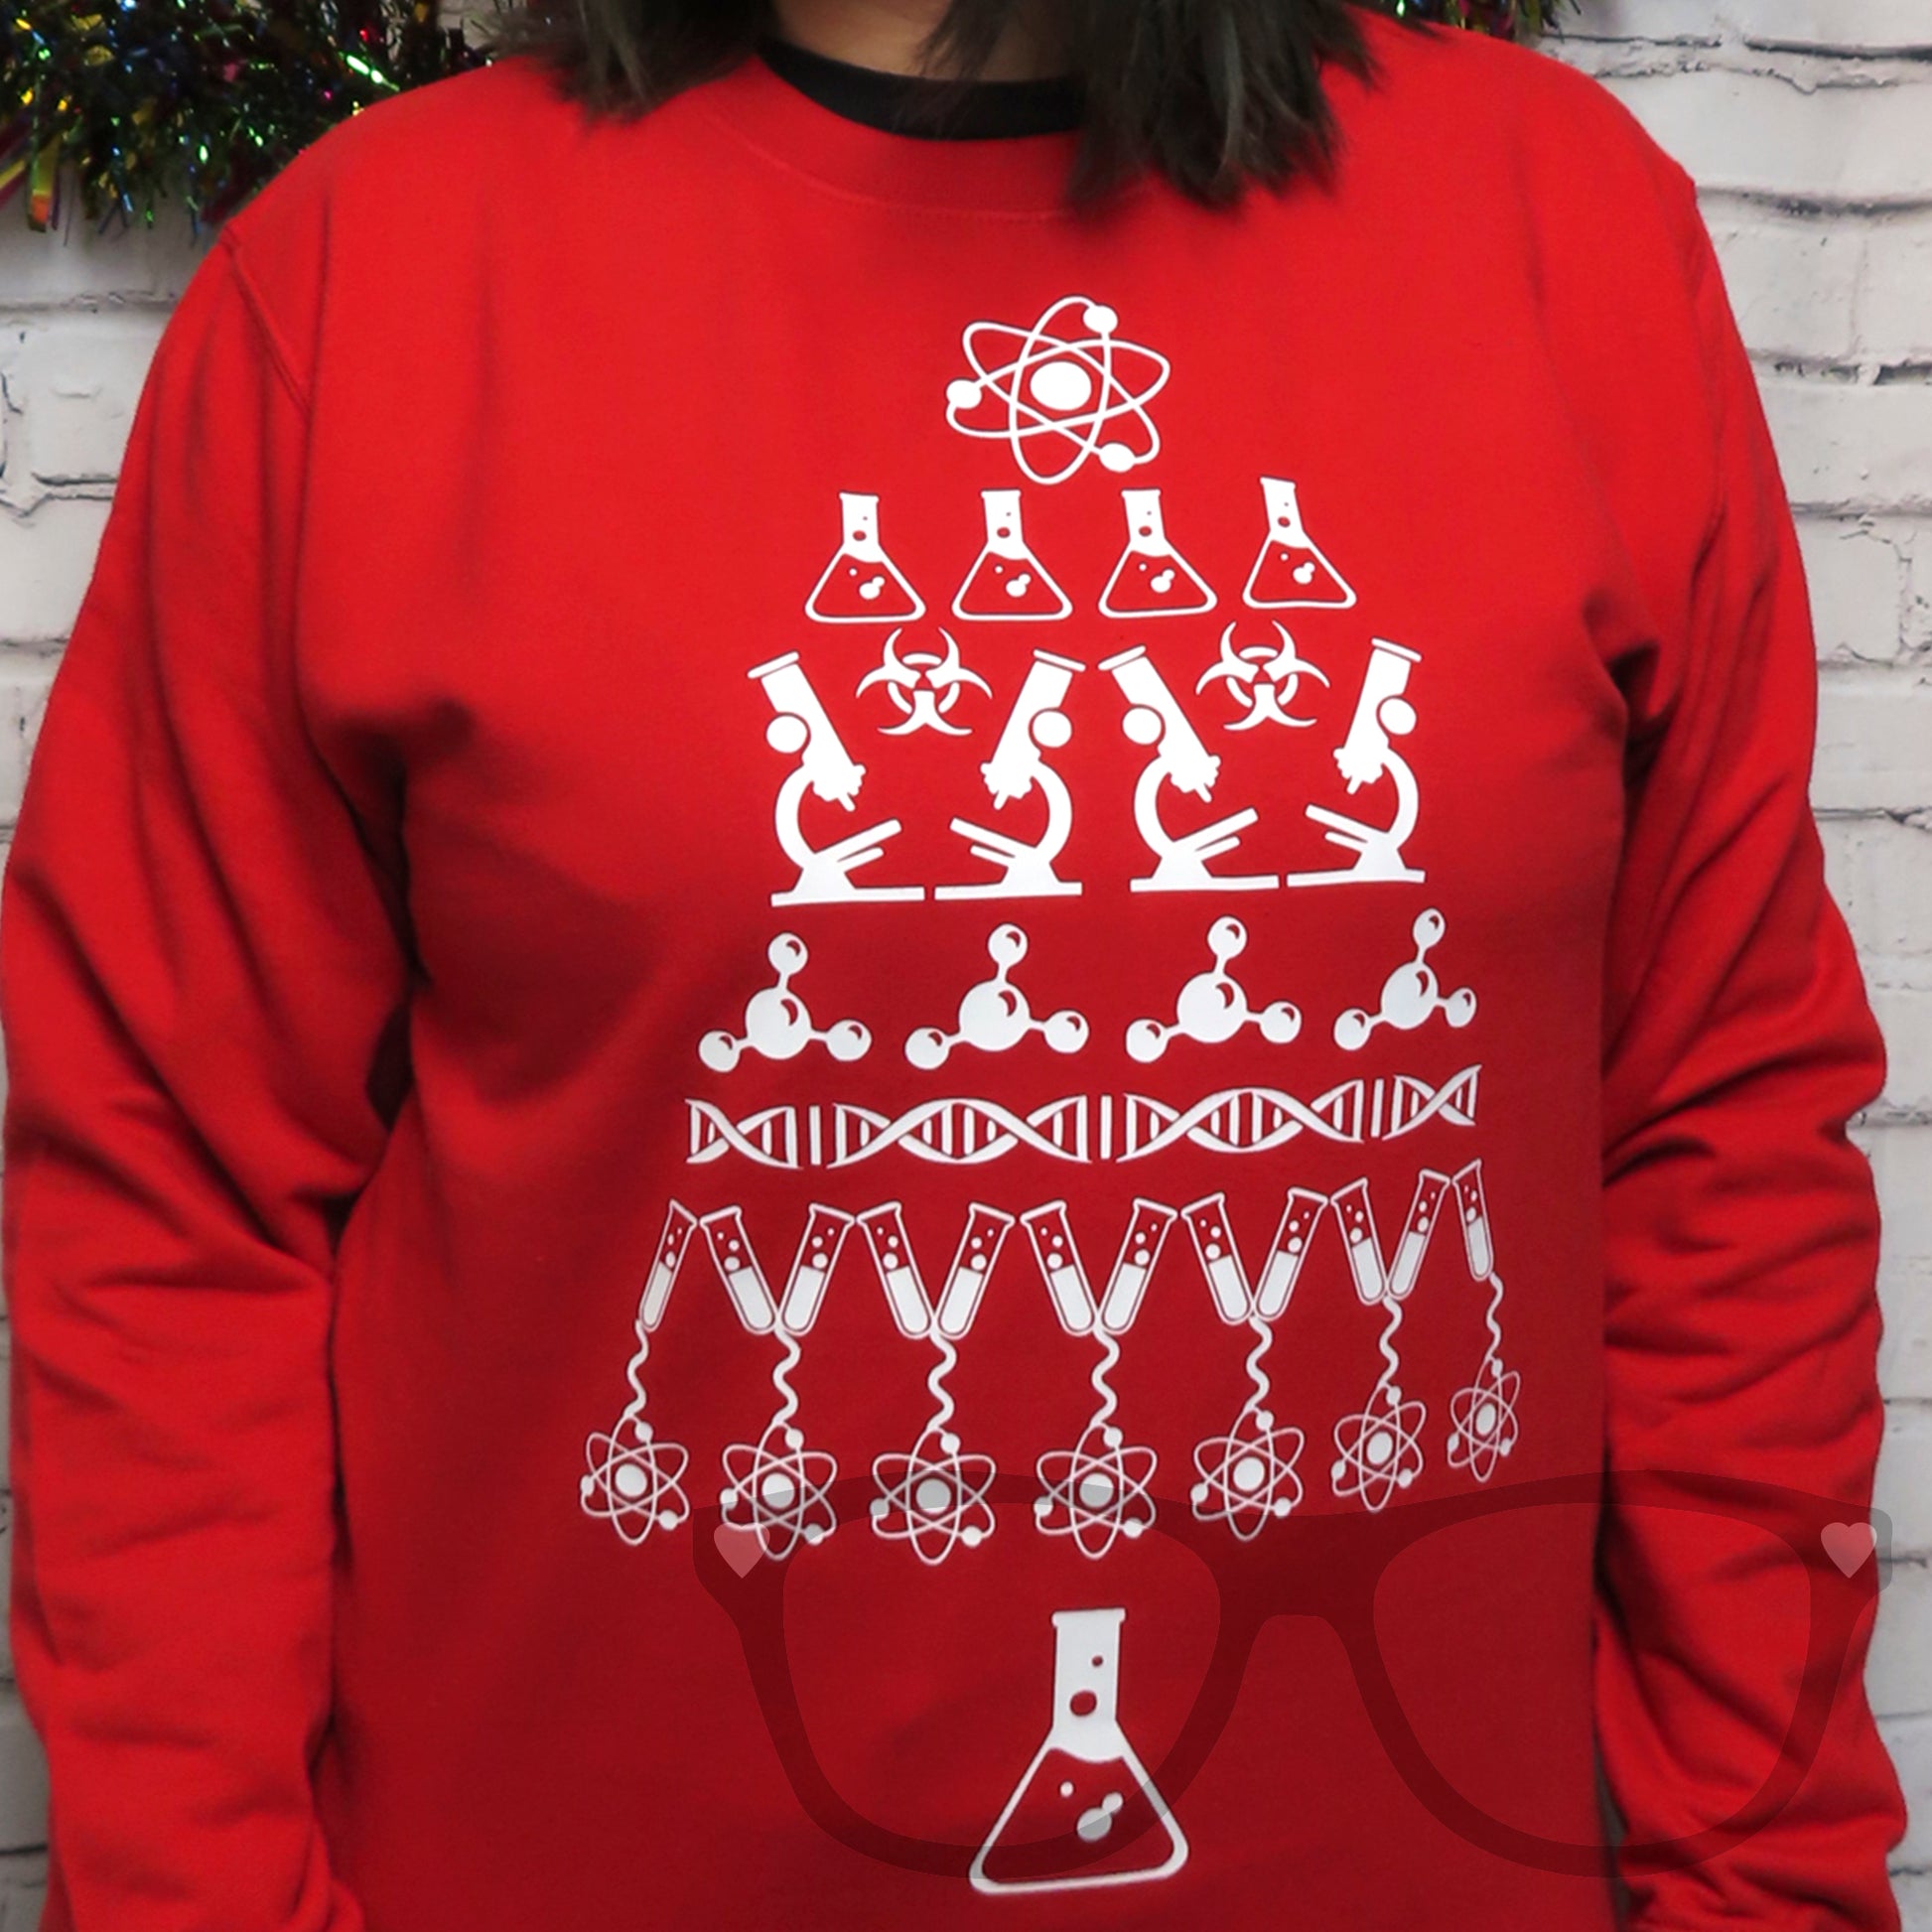 Science Christmas Sweater, white design on a fire red sweater